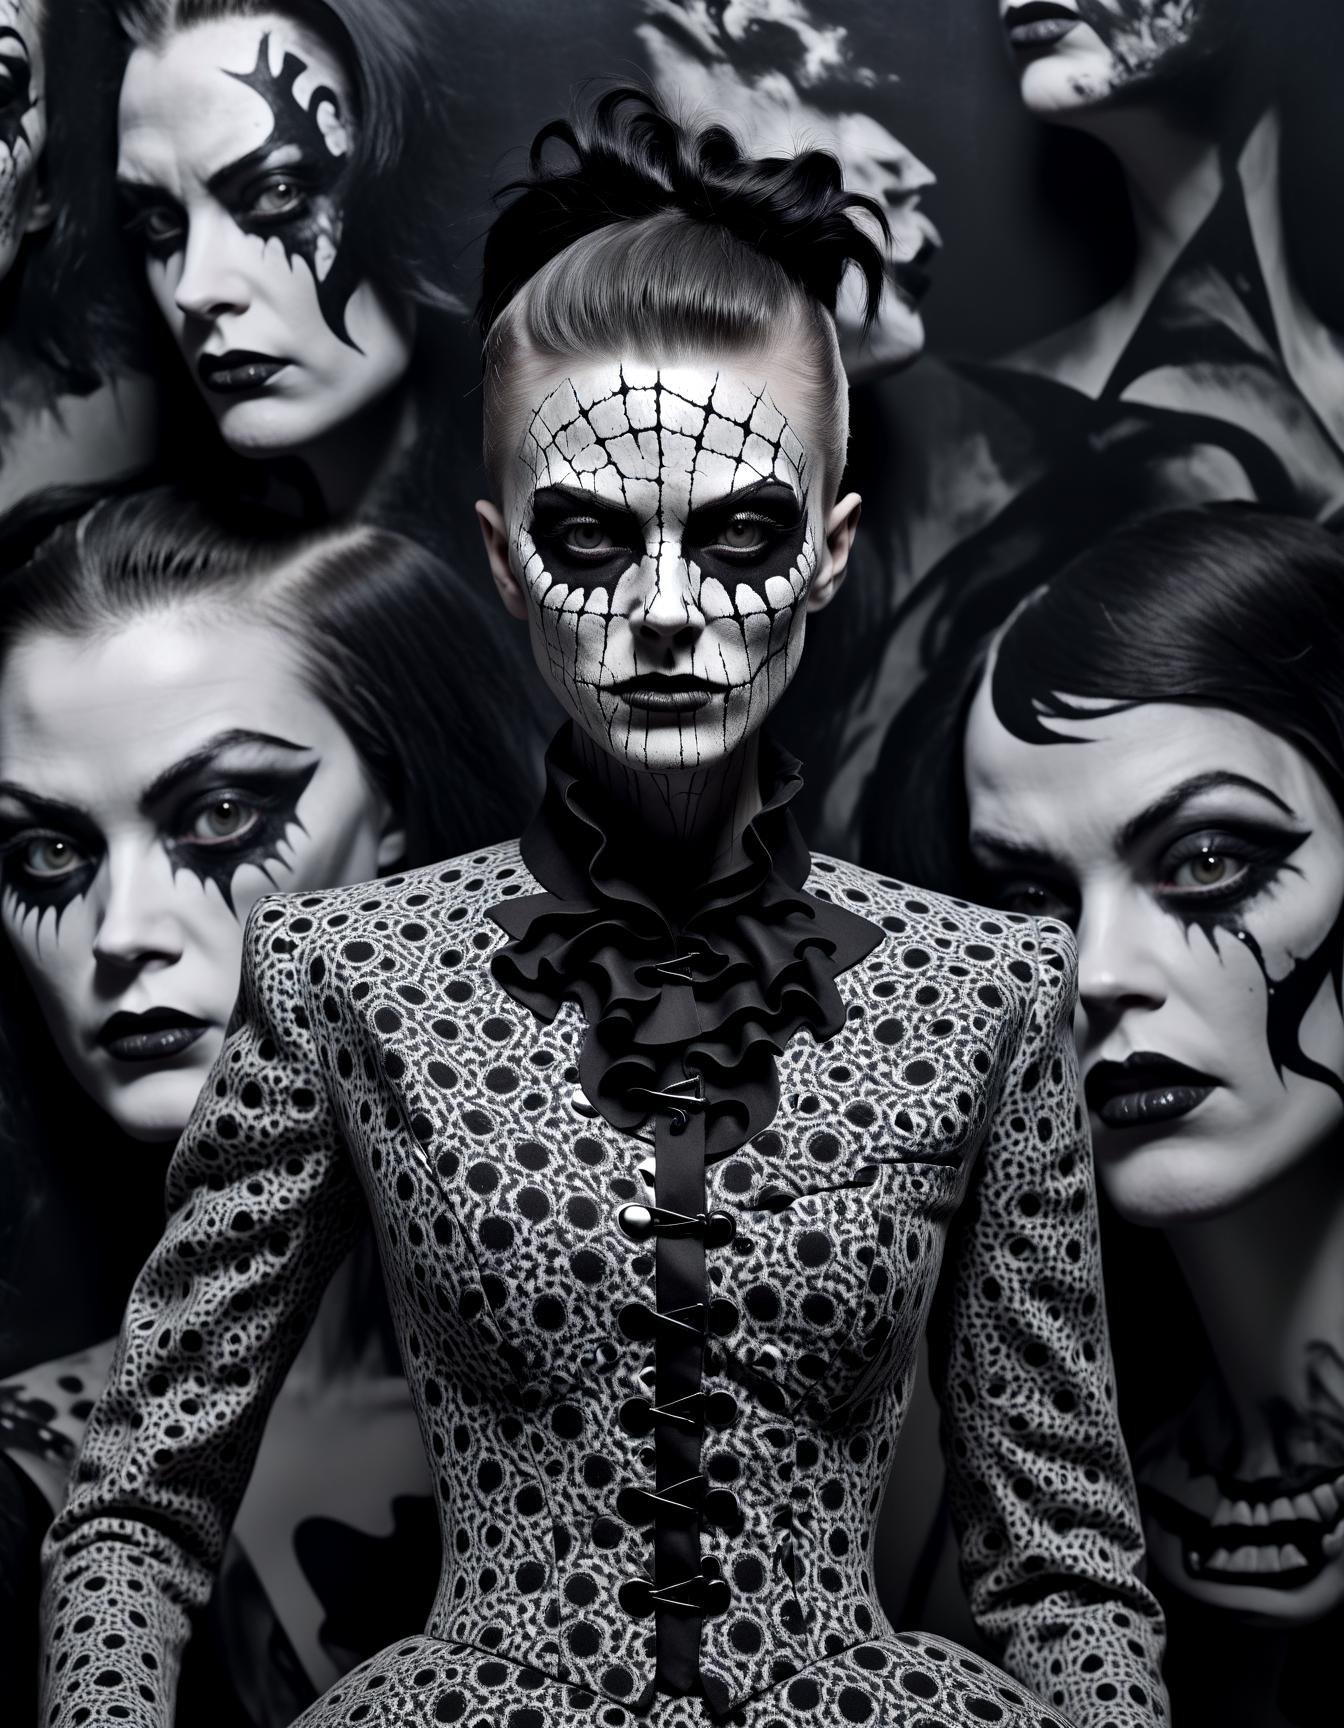 close up portrait, Chaotic black and white patterns, asymmetrical silhouettes, deranged tailoring, surrealistic haute couture, Vogue of Madness, an insane asylum backdrop with stark contrasts, horror, painted with a chainsaw,detailed, ,,in (halsman:1.05) style,